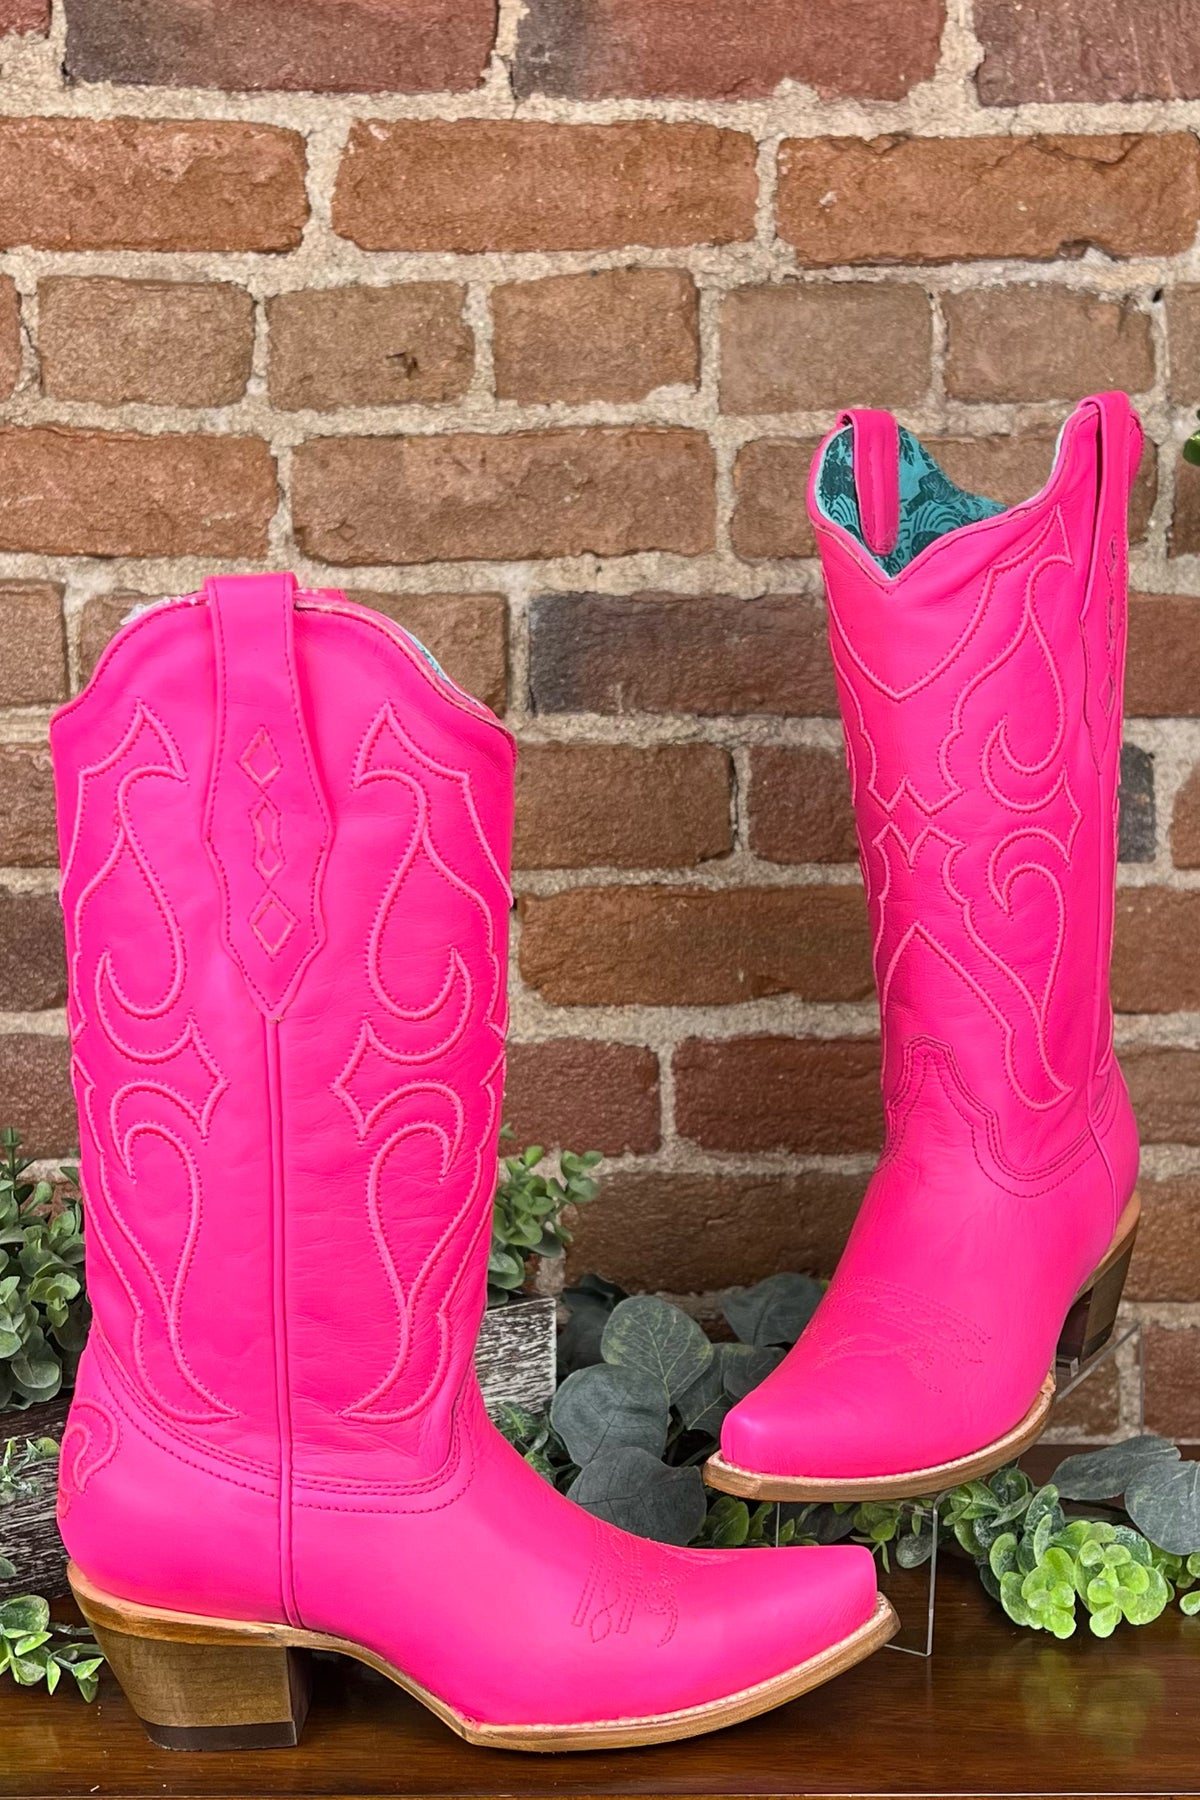 Ladies Embroidered Fuchsia Pink Snip Toe Boot by Corral Boots-Boot-Corral Boots-Gallop 'n Glitz- Women's Western Wear Boutique, Located in Grants Pass, Oregon